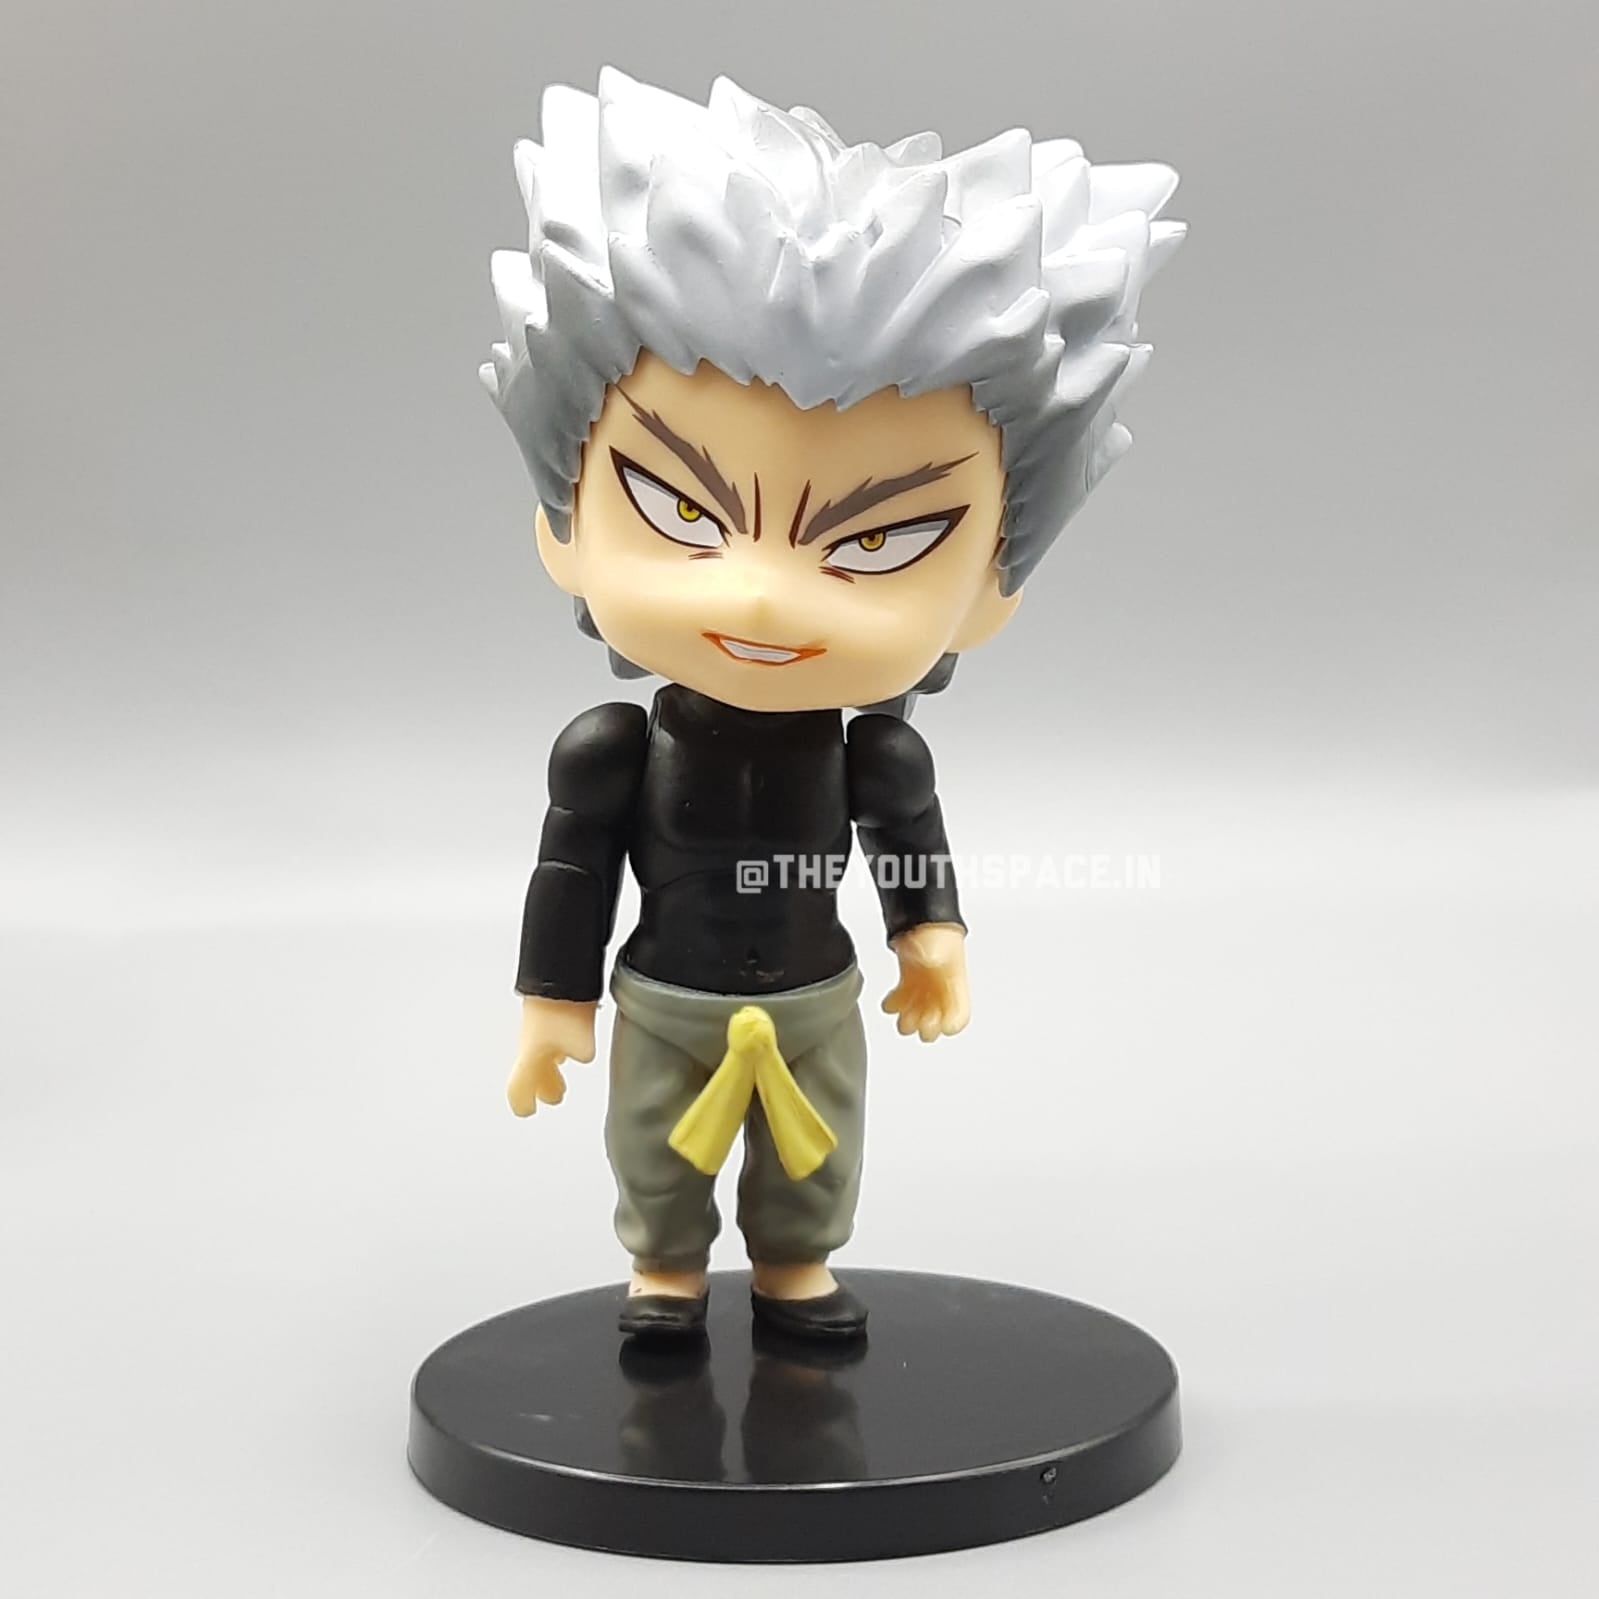 One punch man figurines in set of 5